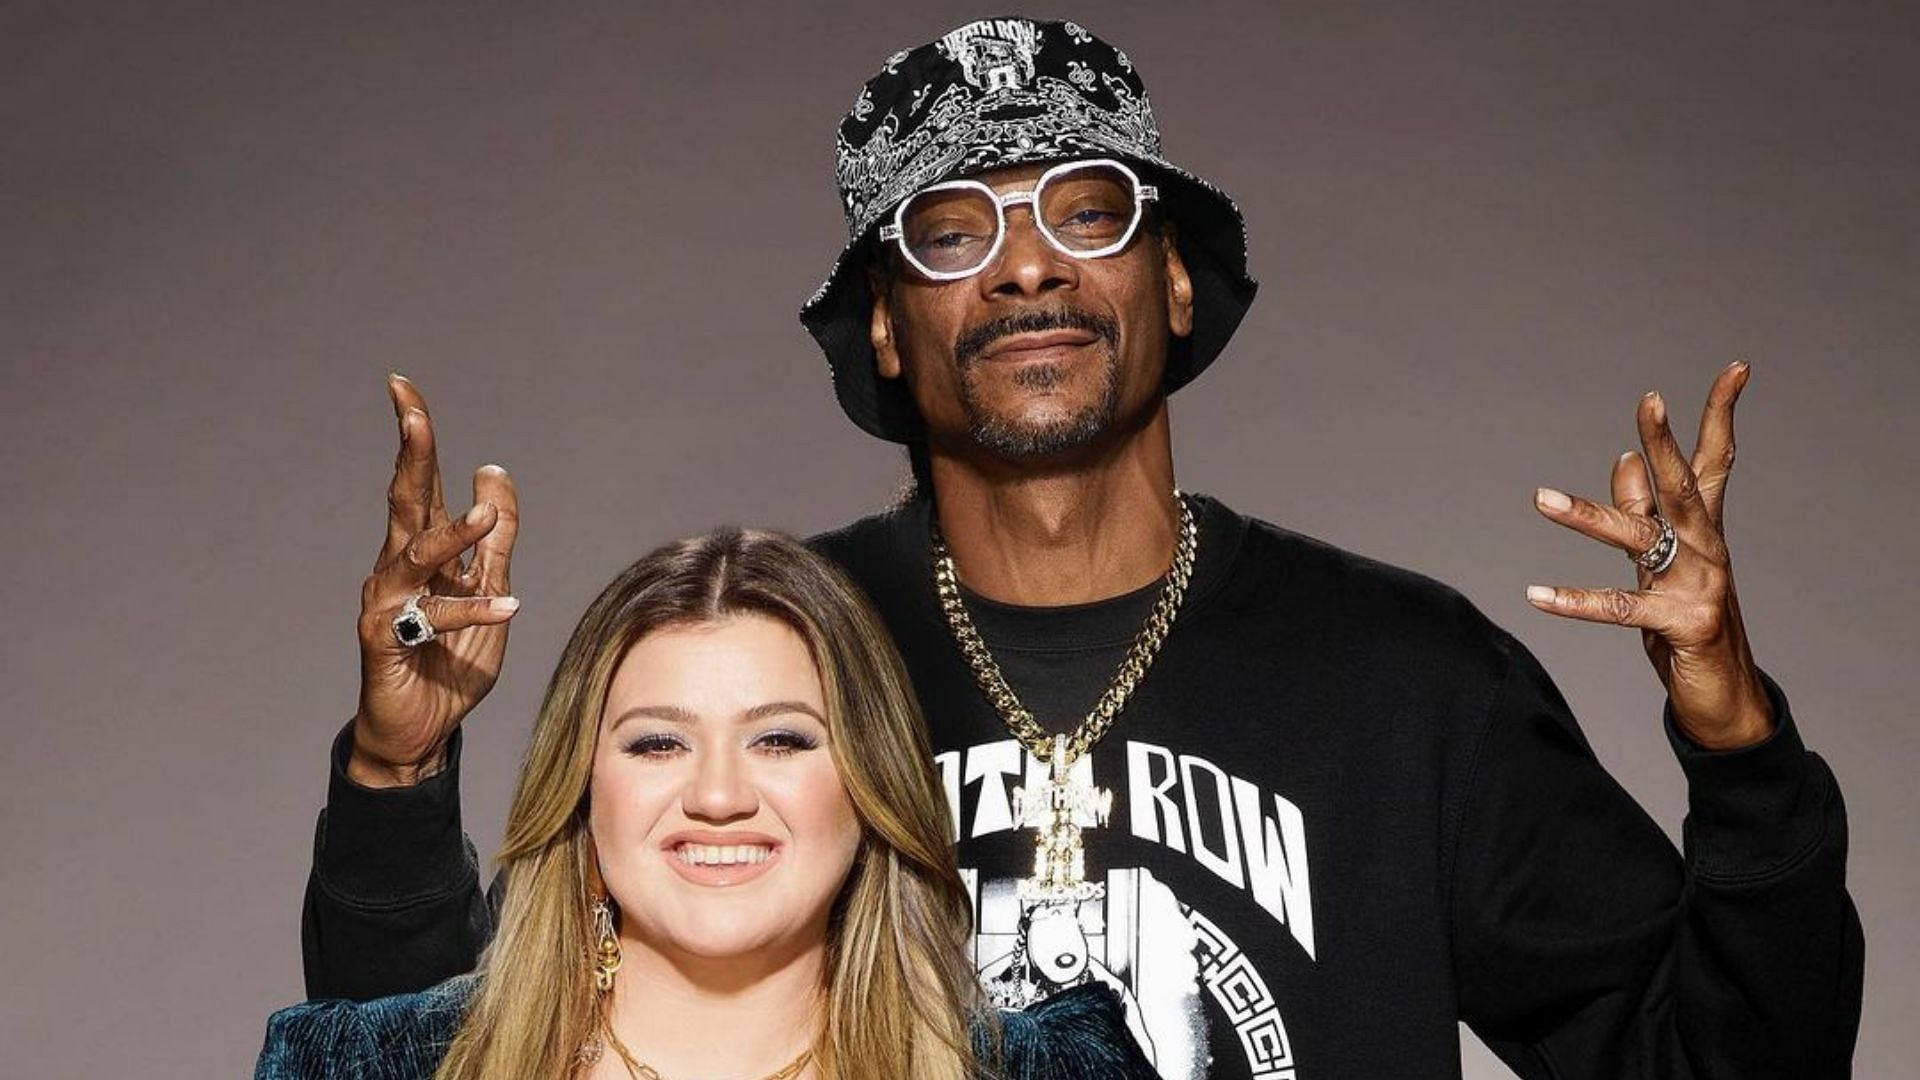 Kelly Clarkson and Snoop Dogg host American Song Contest (Image via kellyclarkson/Instagram)